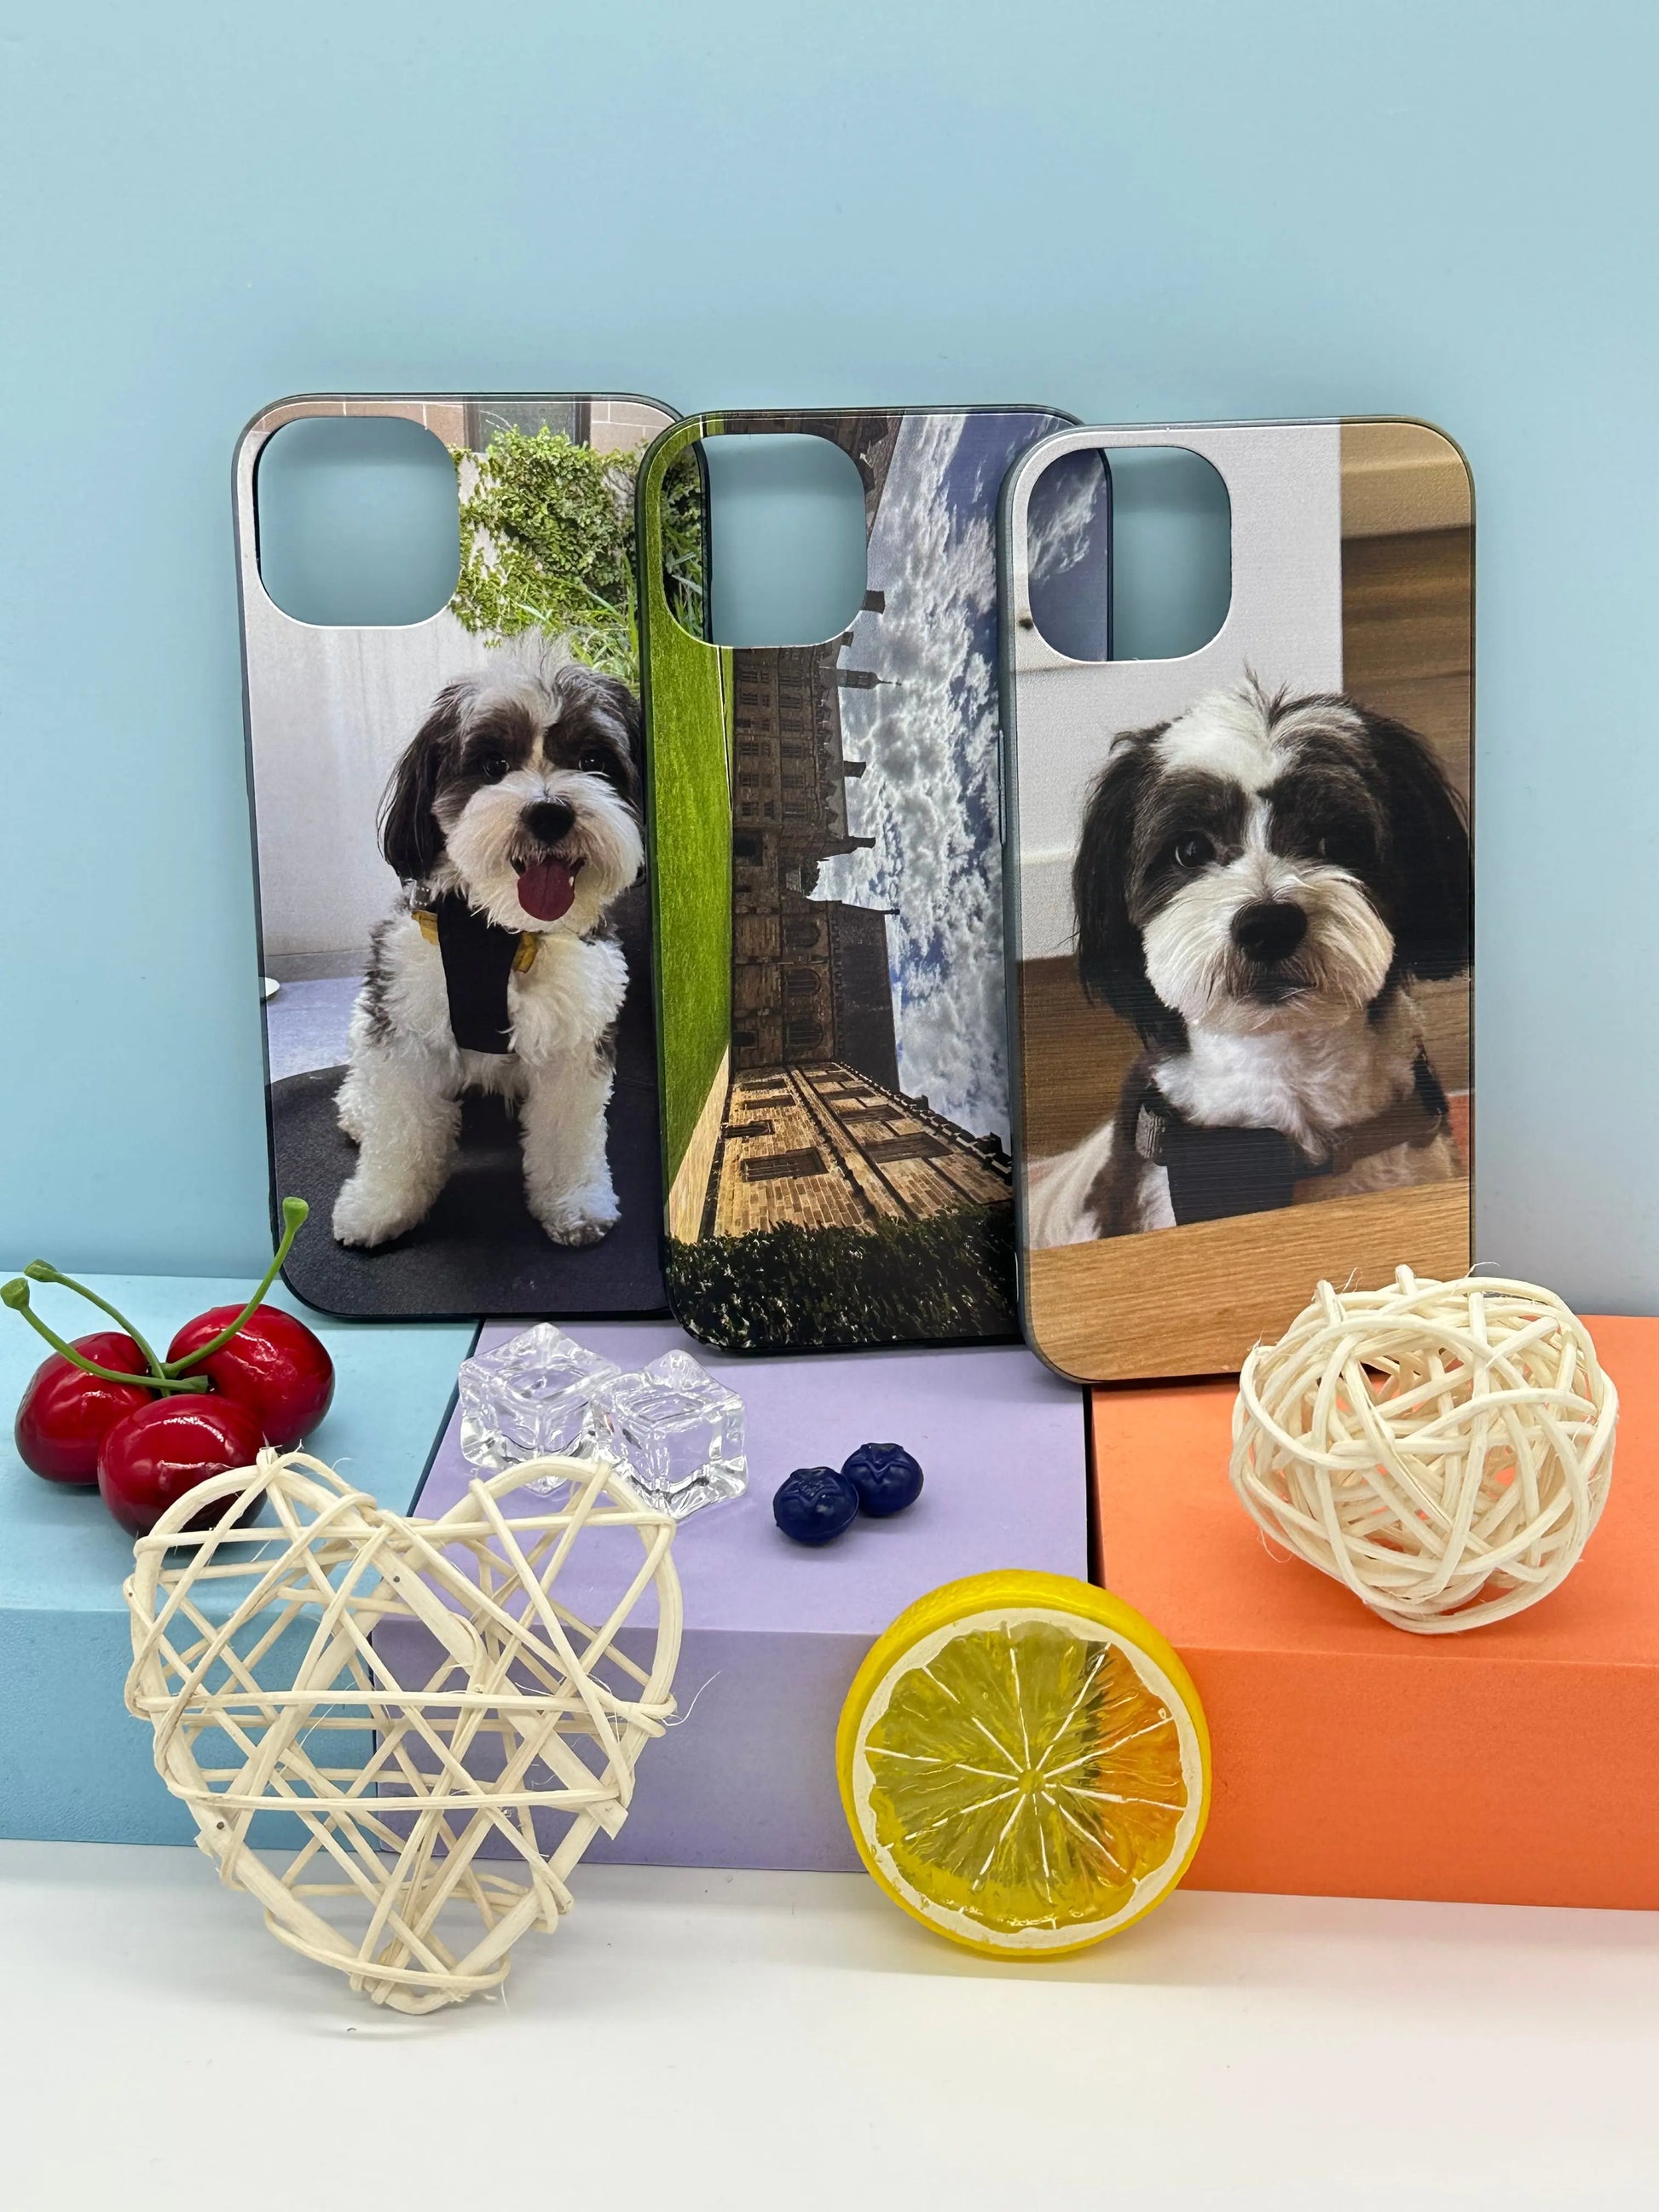 iPhone All Models |Samsung S8- NOTE 20U | Personalized Photo Phone Case Sunday's Creative